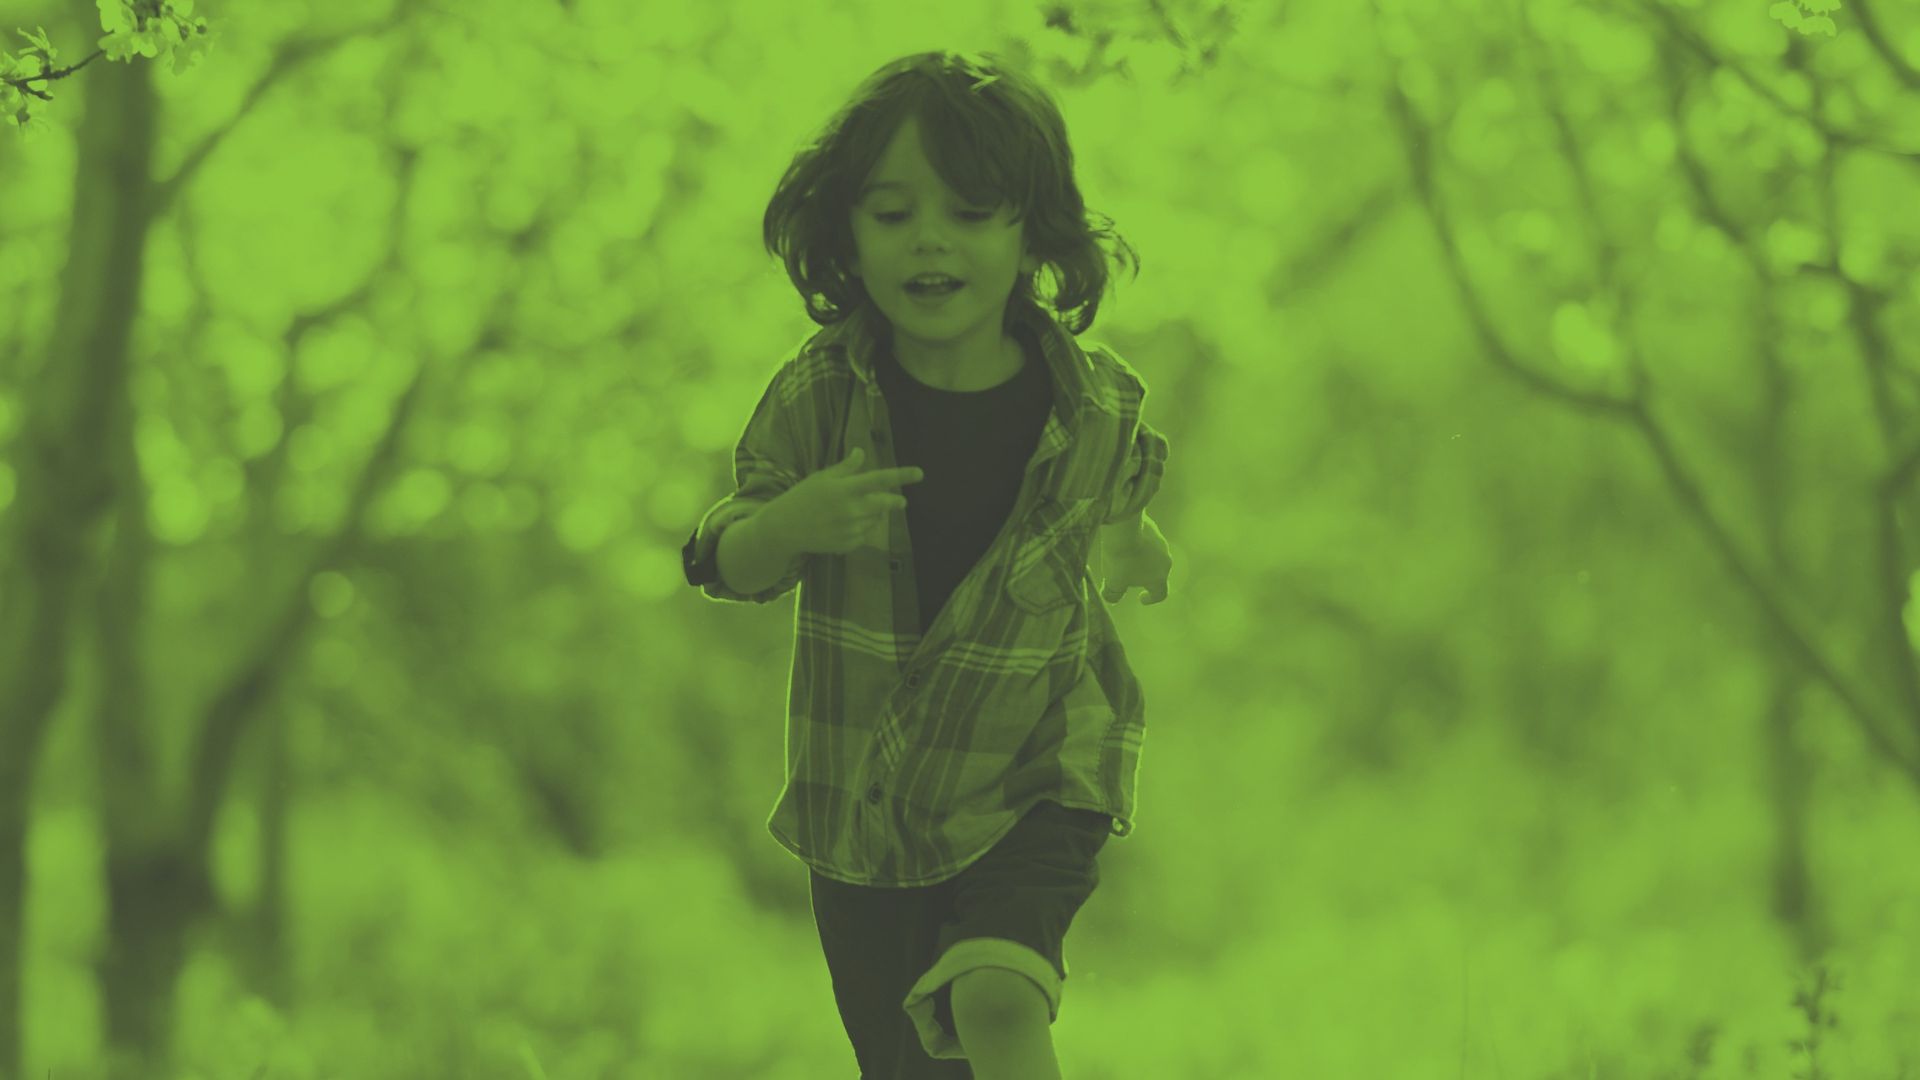 Photo of a child running through a green and wooded space - Aviva's Community Fund initiative provides support for projects with financial wellbeing and climate action as their focus.